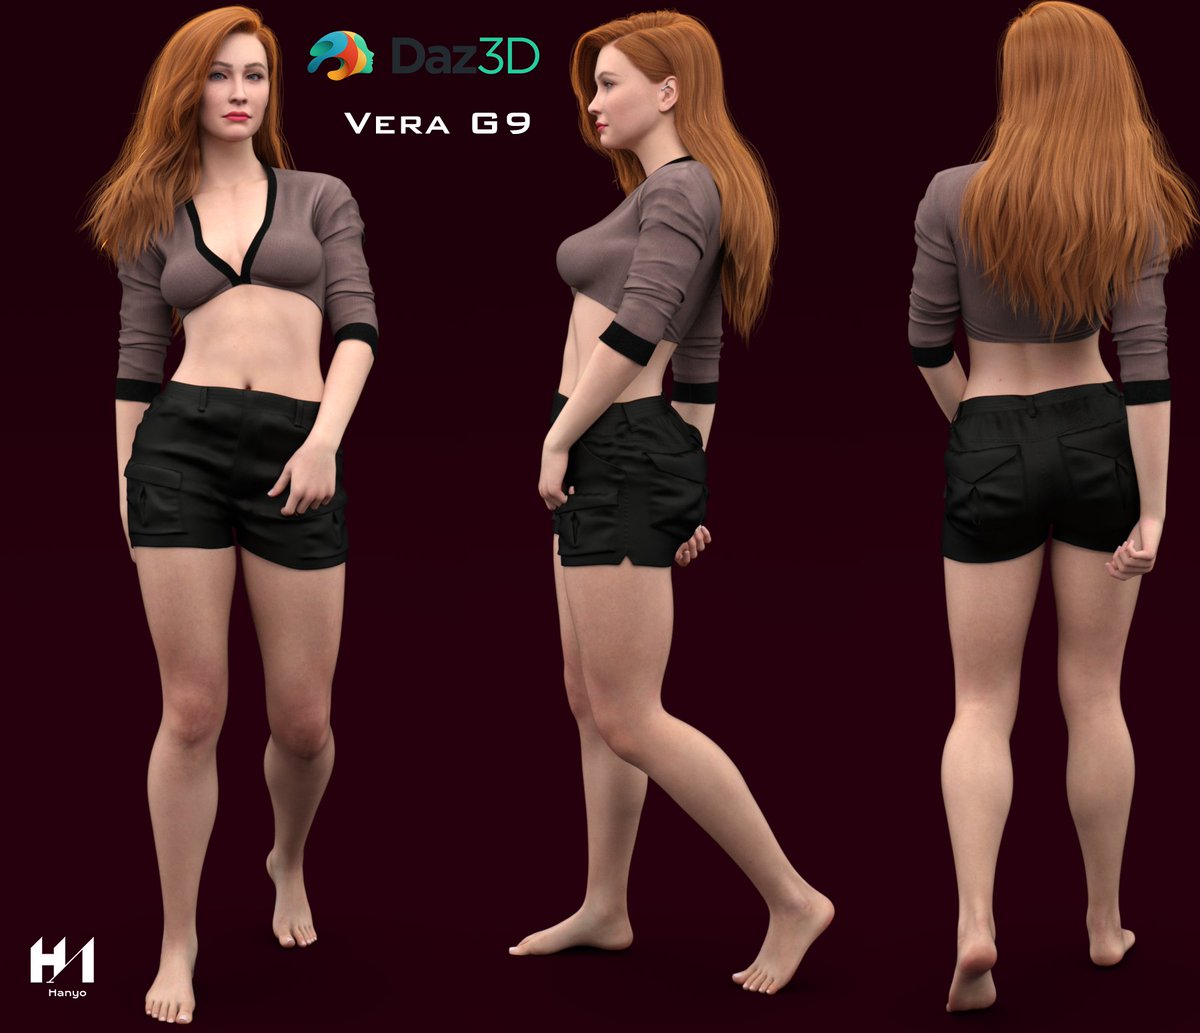 Check out my latest model @RenderHub3D , Vera for G9 
#amazonfemale #theboys #queenmaeve #DAZ3D